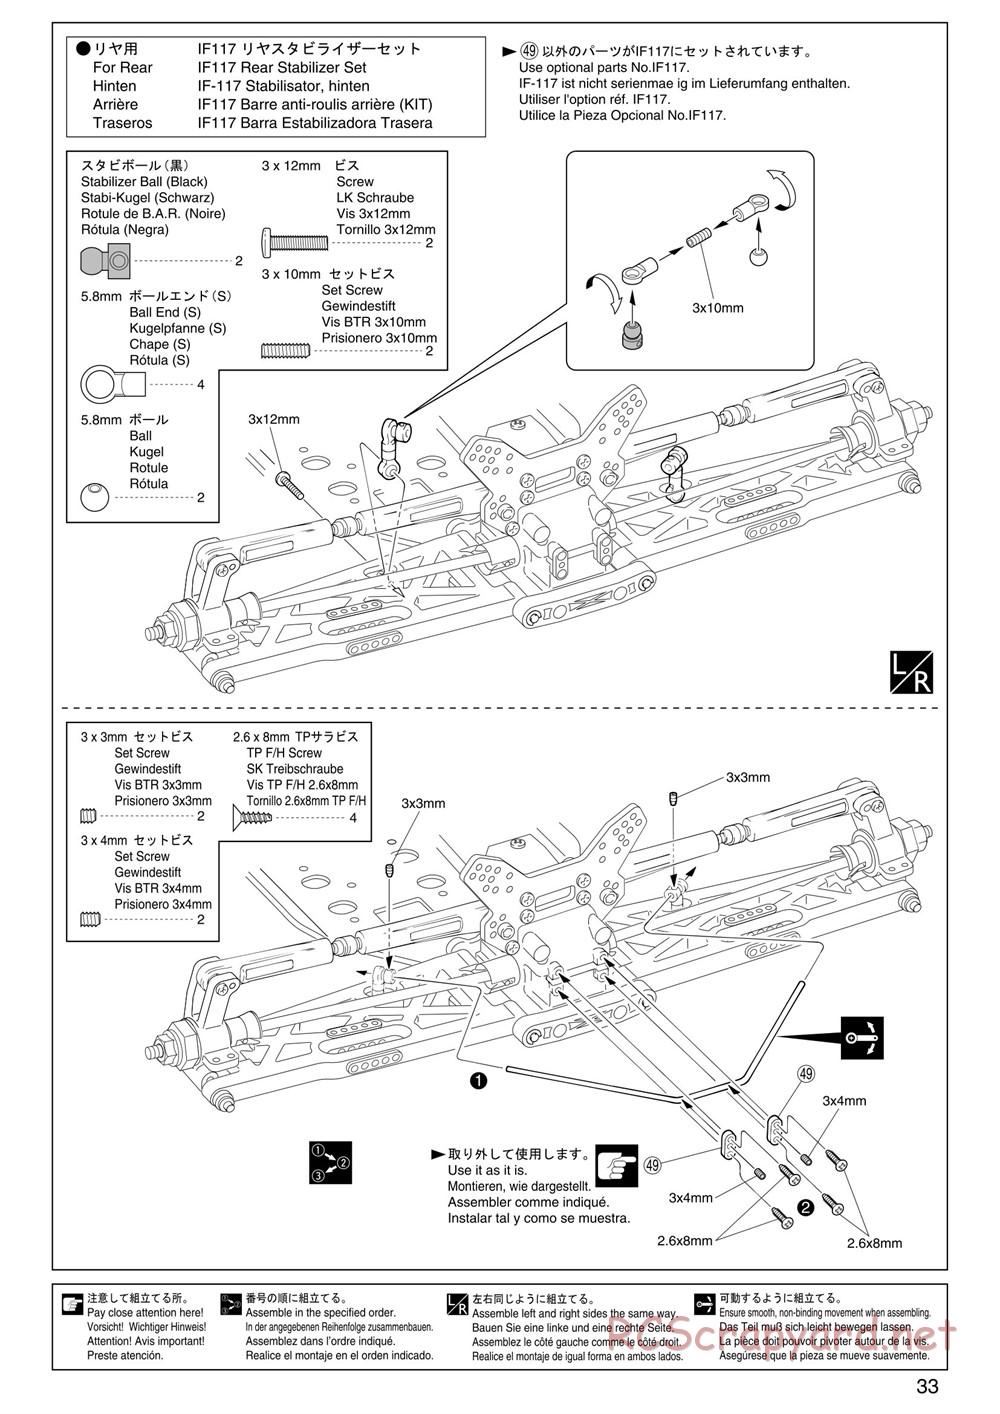 Kyosho - Inferno ST (2005) - Manual - Page 33